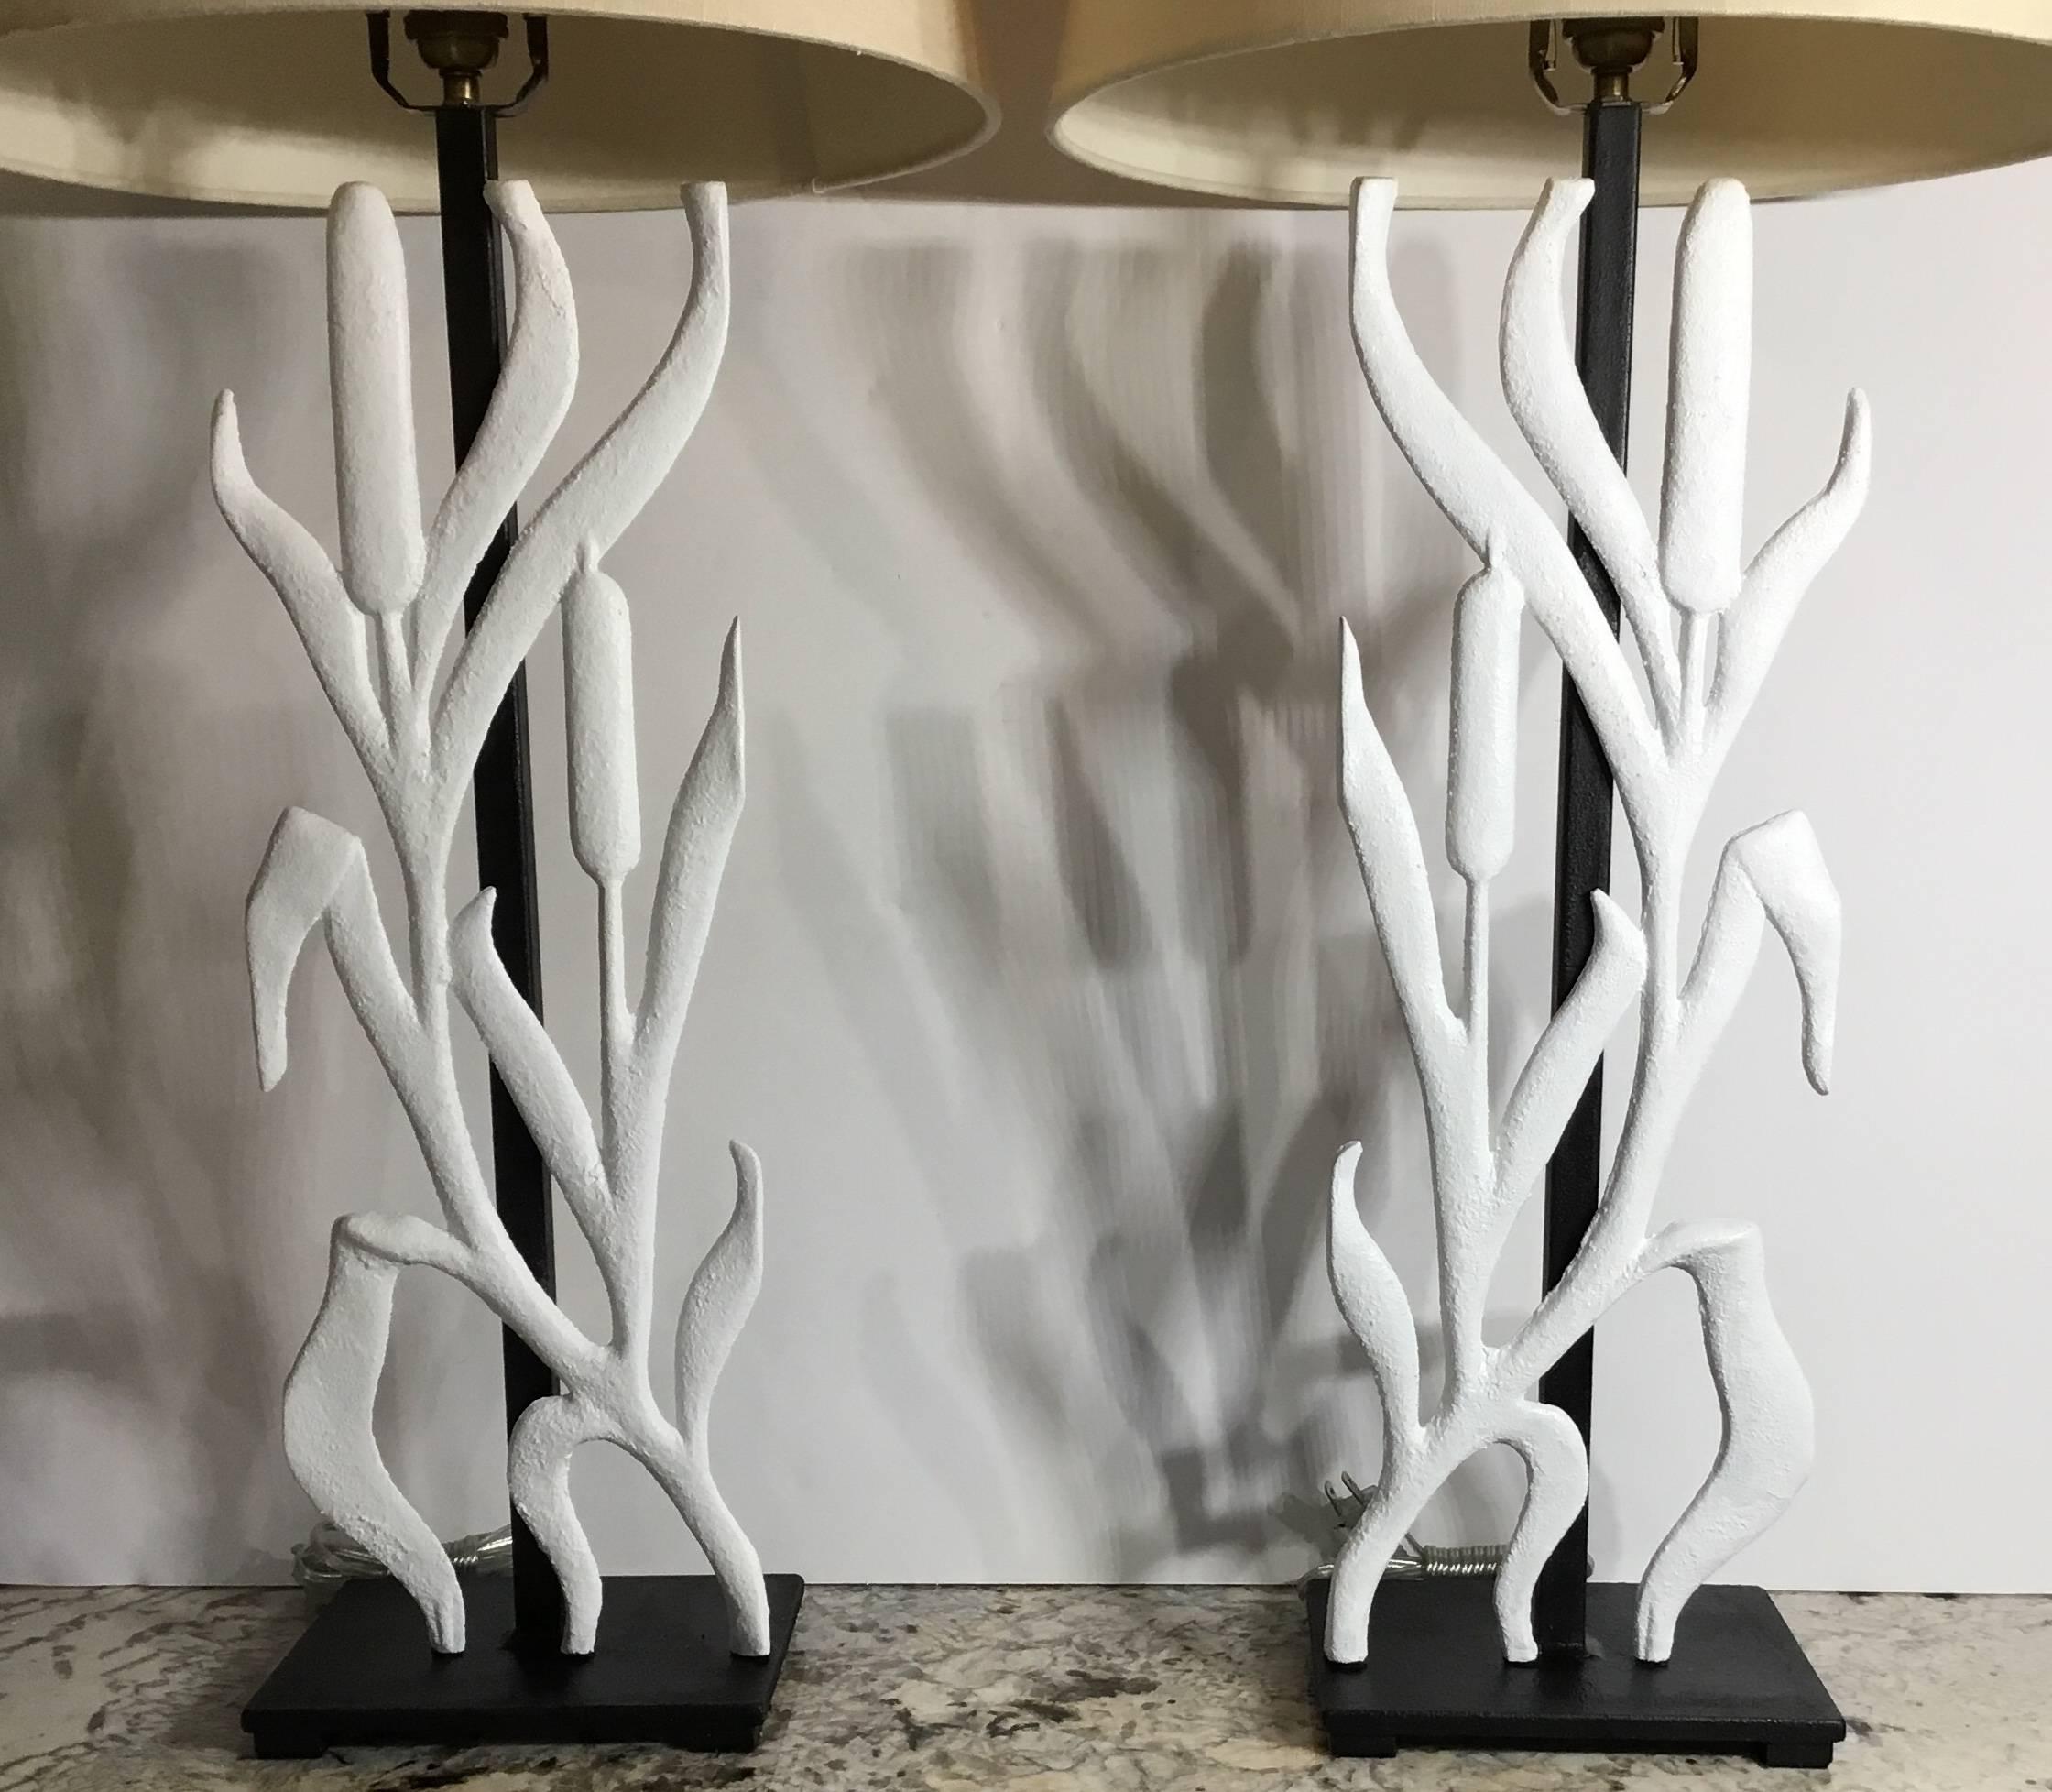 Elegant pair of table lamps made of cast iron cat tail motif hand-painted in flat white, professionally mounted on a custom-made steel base. Electrified and ready to light.
Great decorative pair for any room. Shades are not included. Measures: